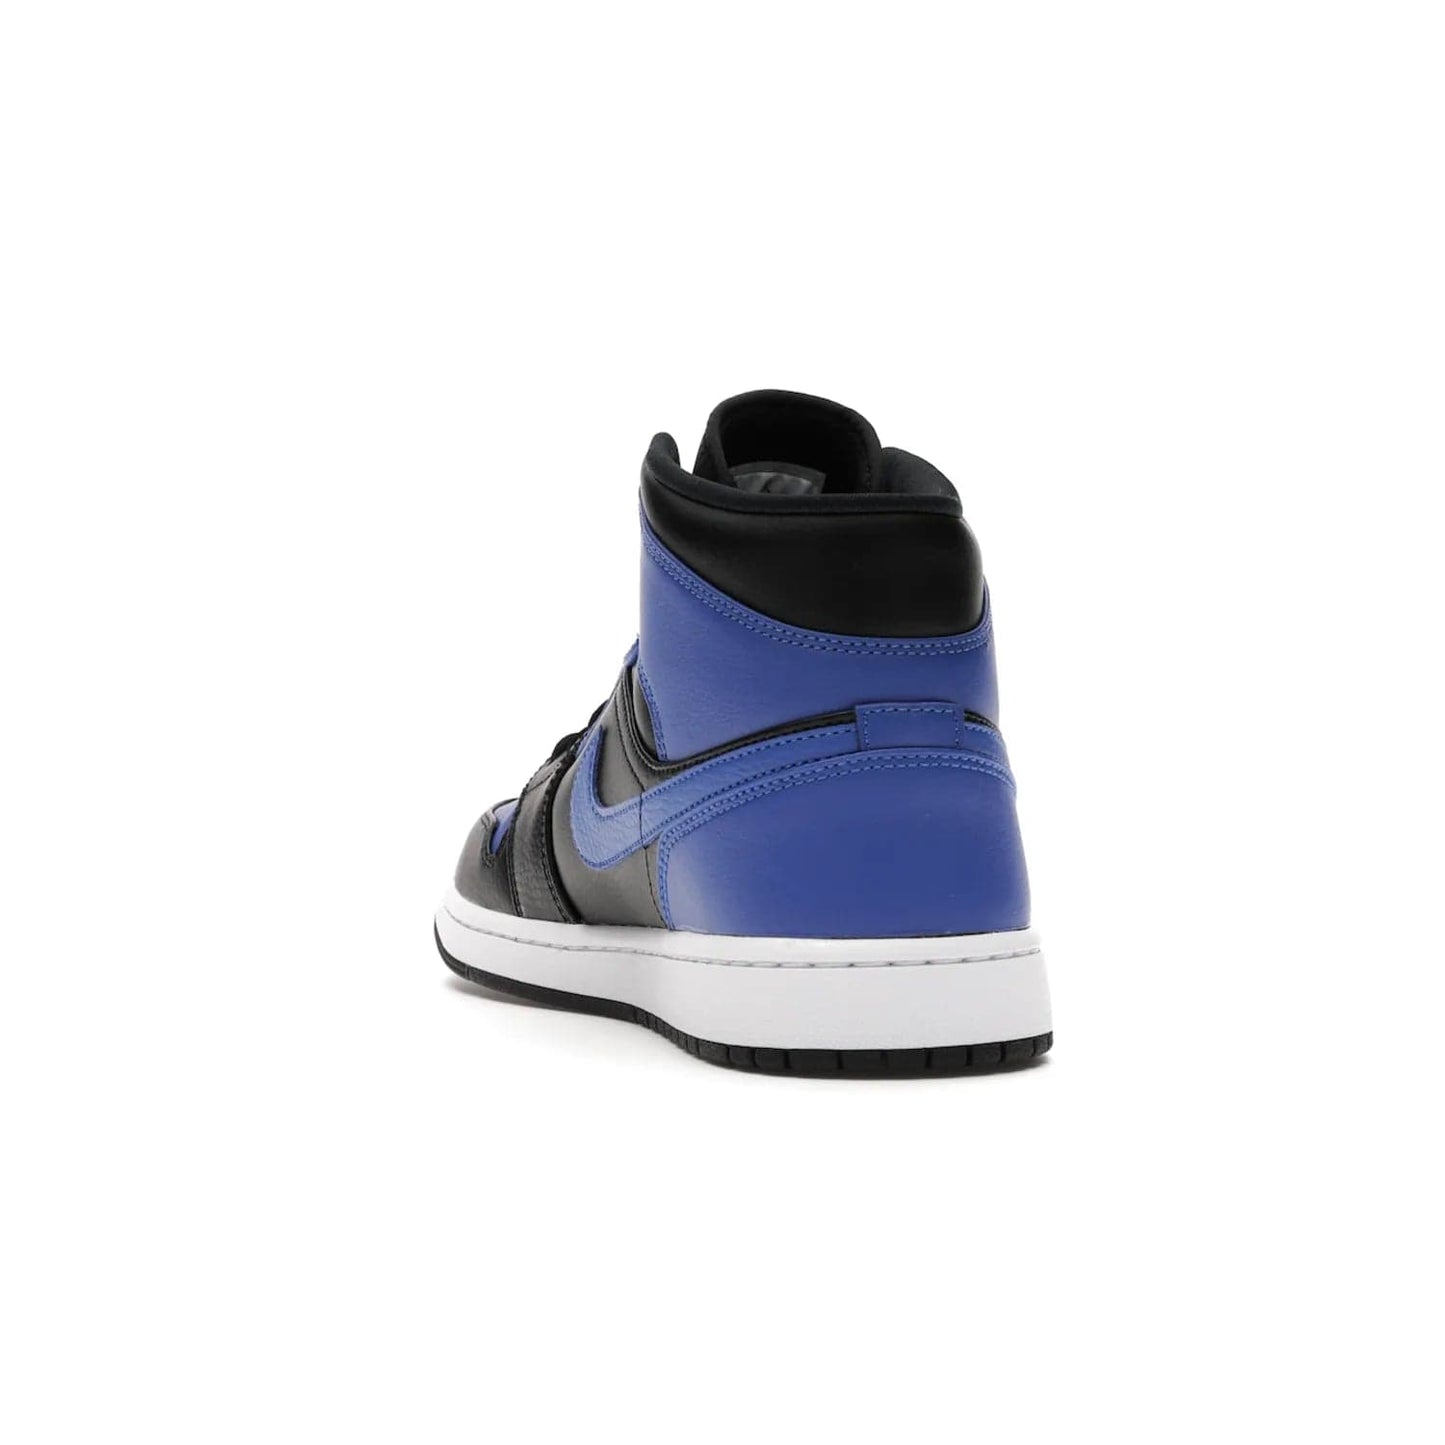 Jordan 1 Mid Hyper Royal Tumbled Leather - Image 26 - Only at www.BallersClubKickz.com - Iconic colorway of the Air Jordan 1 Mid Black Royal Tumbled Leather. Features a black tumbled leather upper, royal blue leather overlays, white midsole & black rubber outsole. Released December 2020. Adds premium style to any collection.